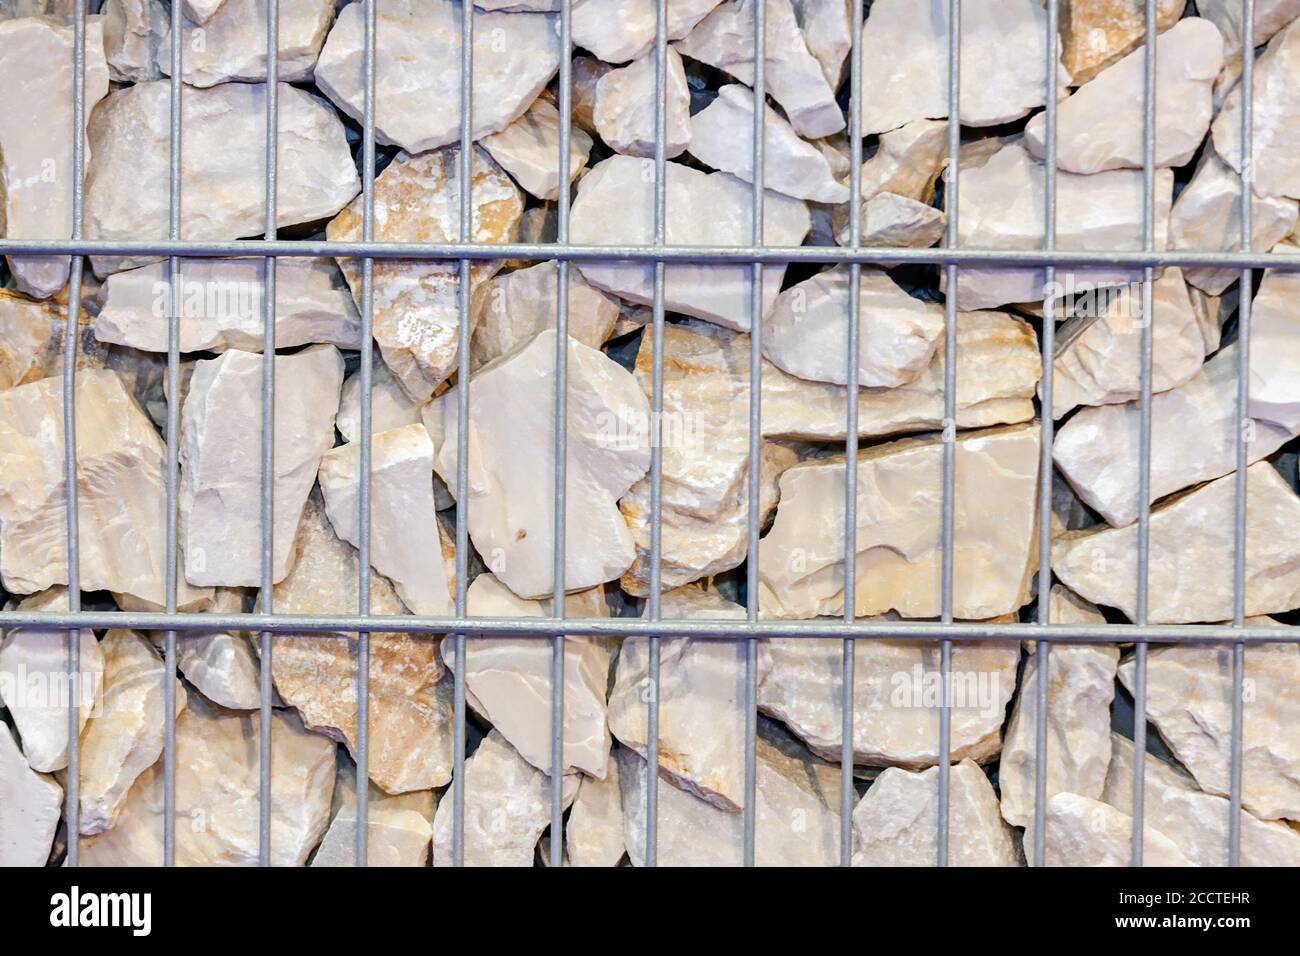 large stones behind wire fences, note shallow depth of field Stock Photo